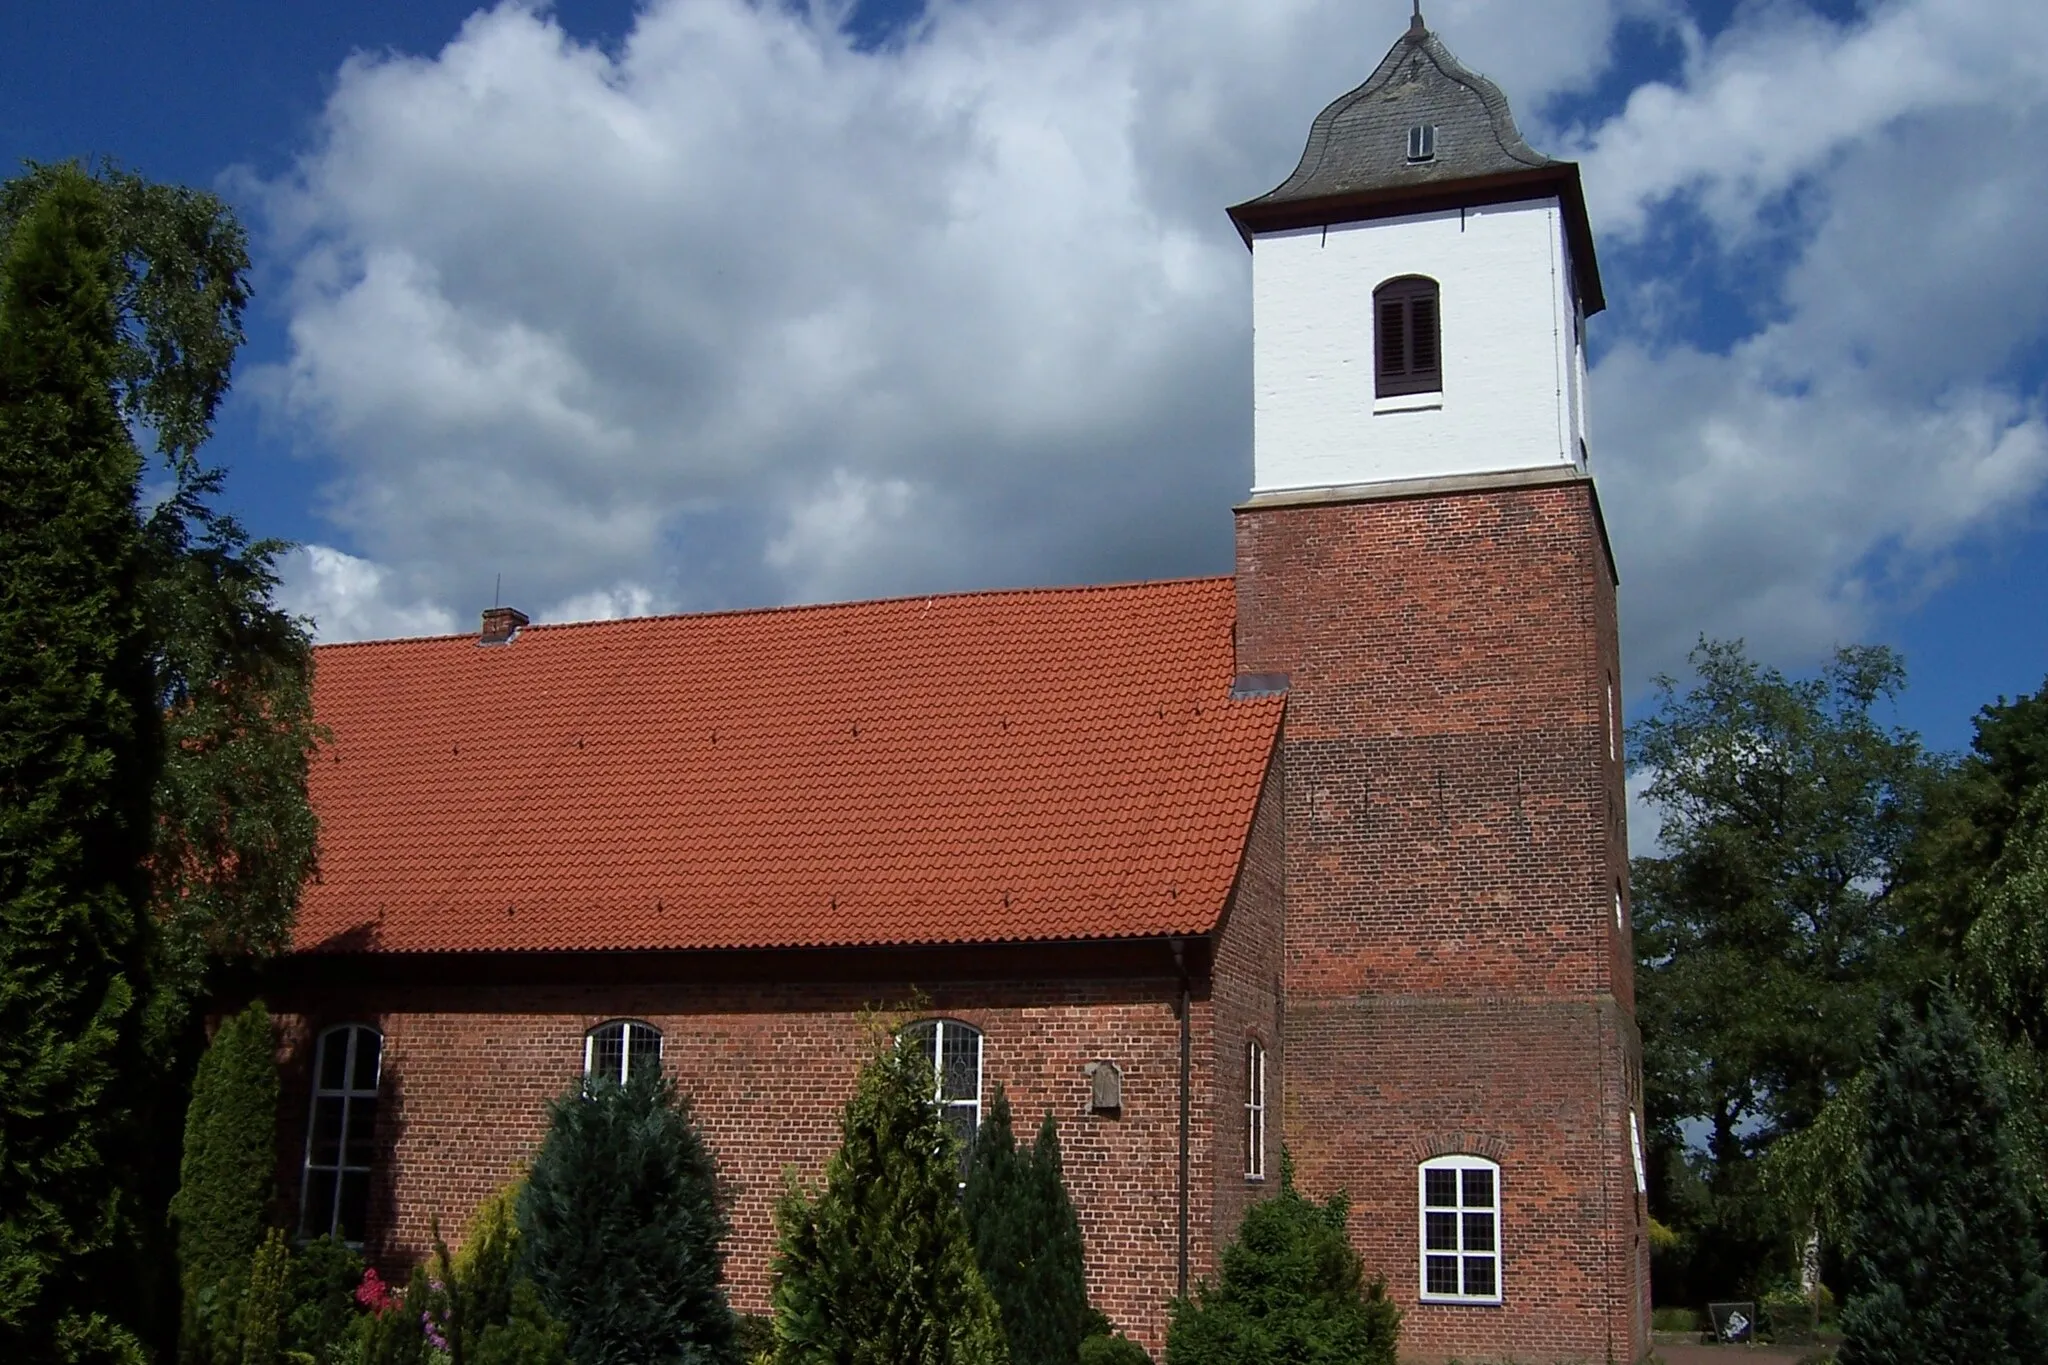 Photo showing: The Zionskirche in Worpswede